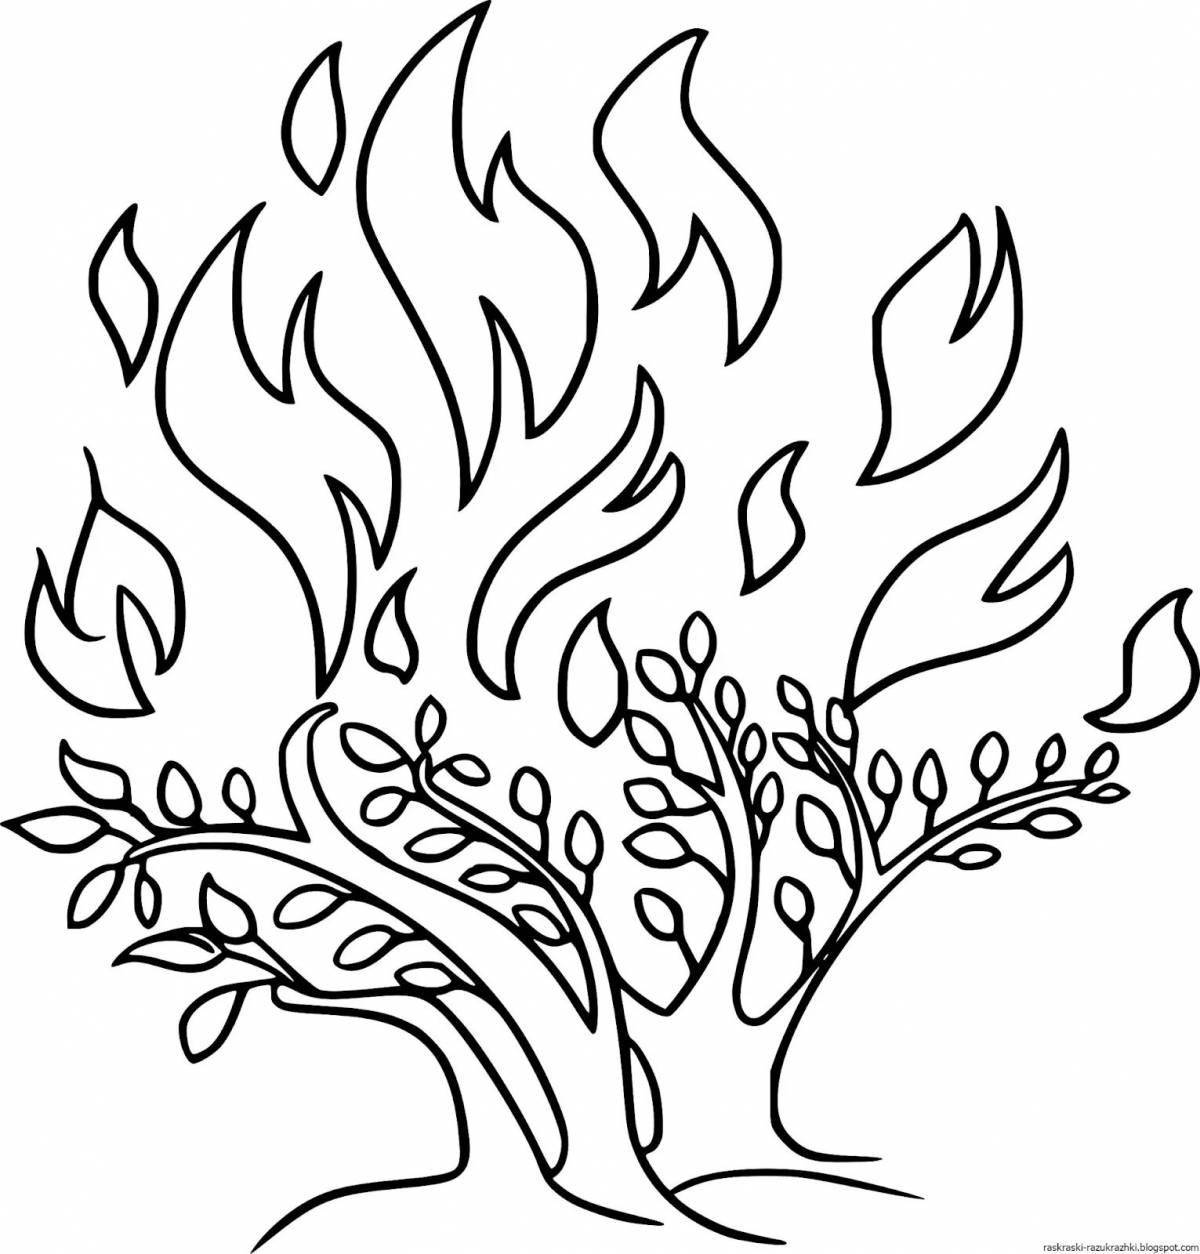 Attention-drawing fire coloring page